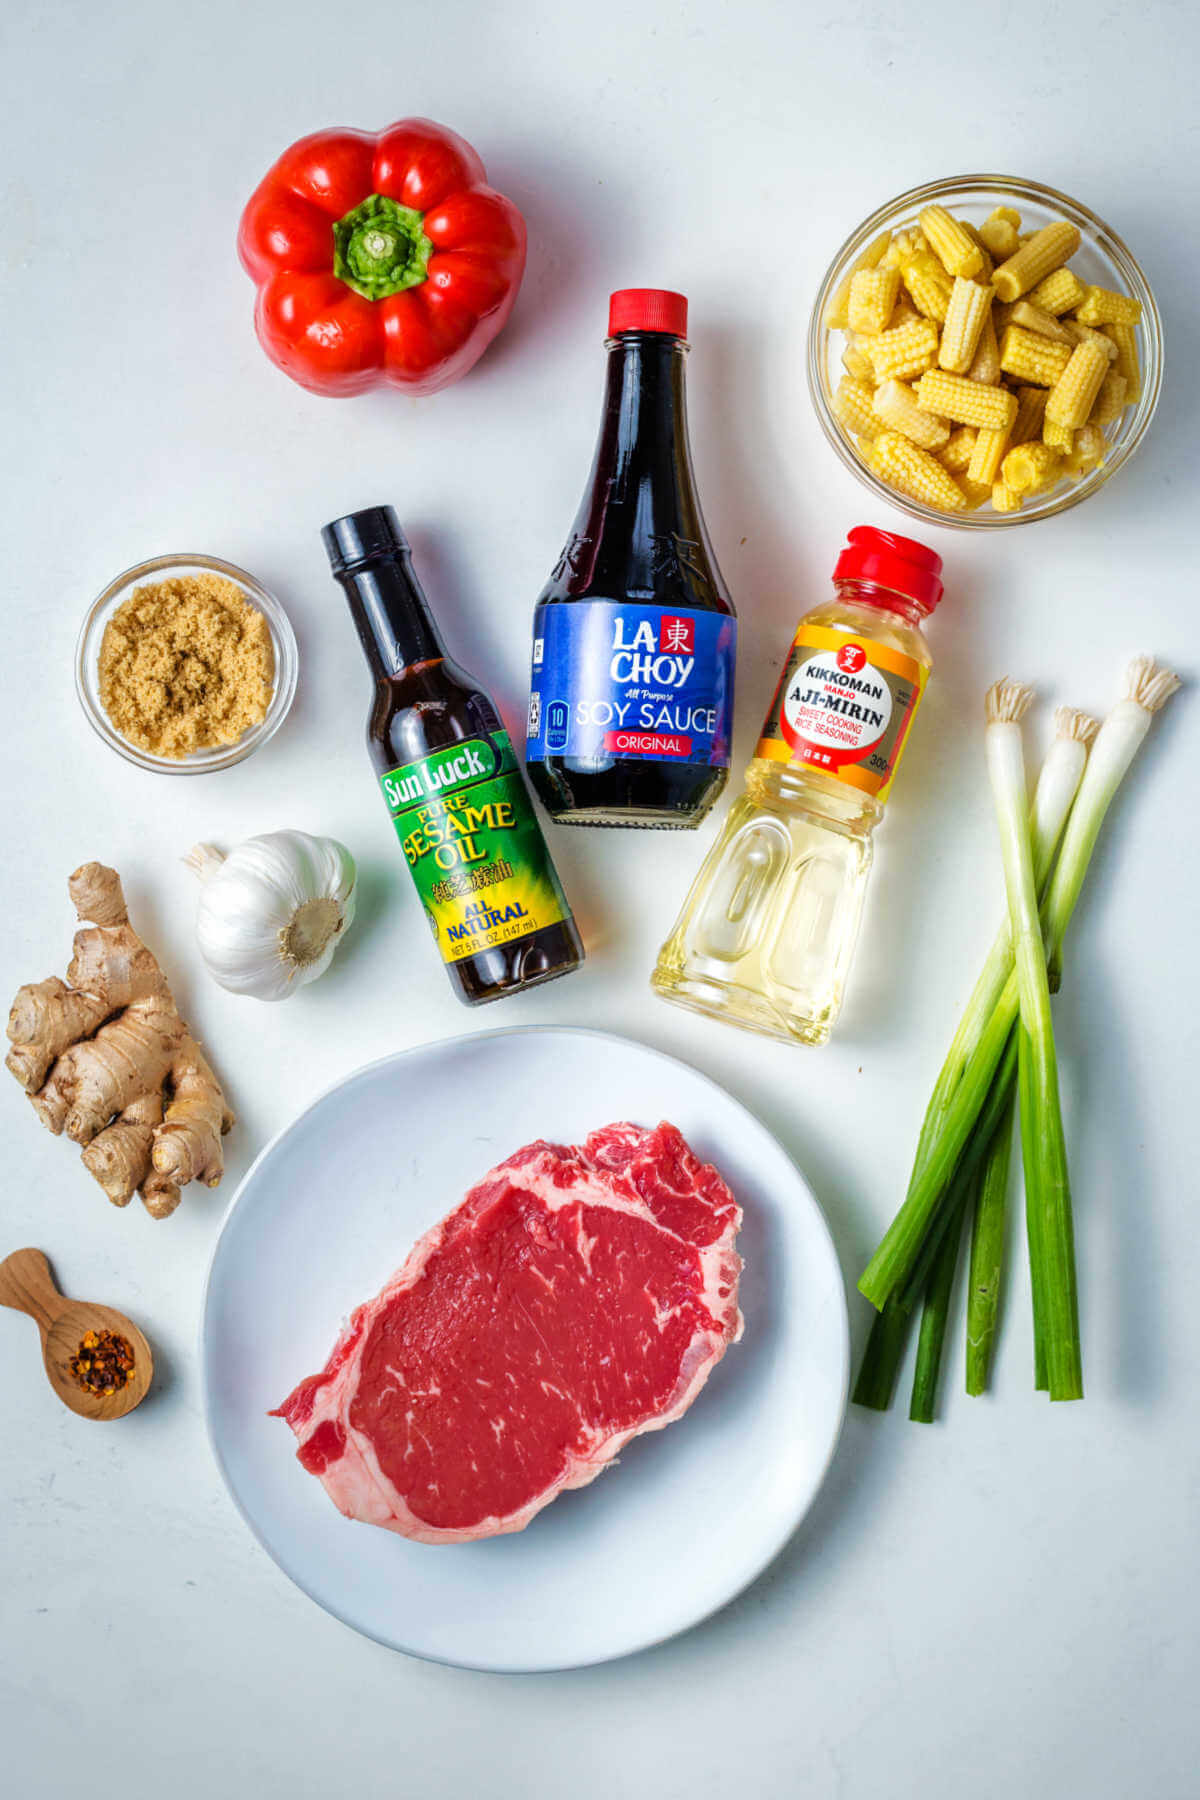 ingredients for Korean Beef Stir Fry on a table.